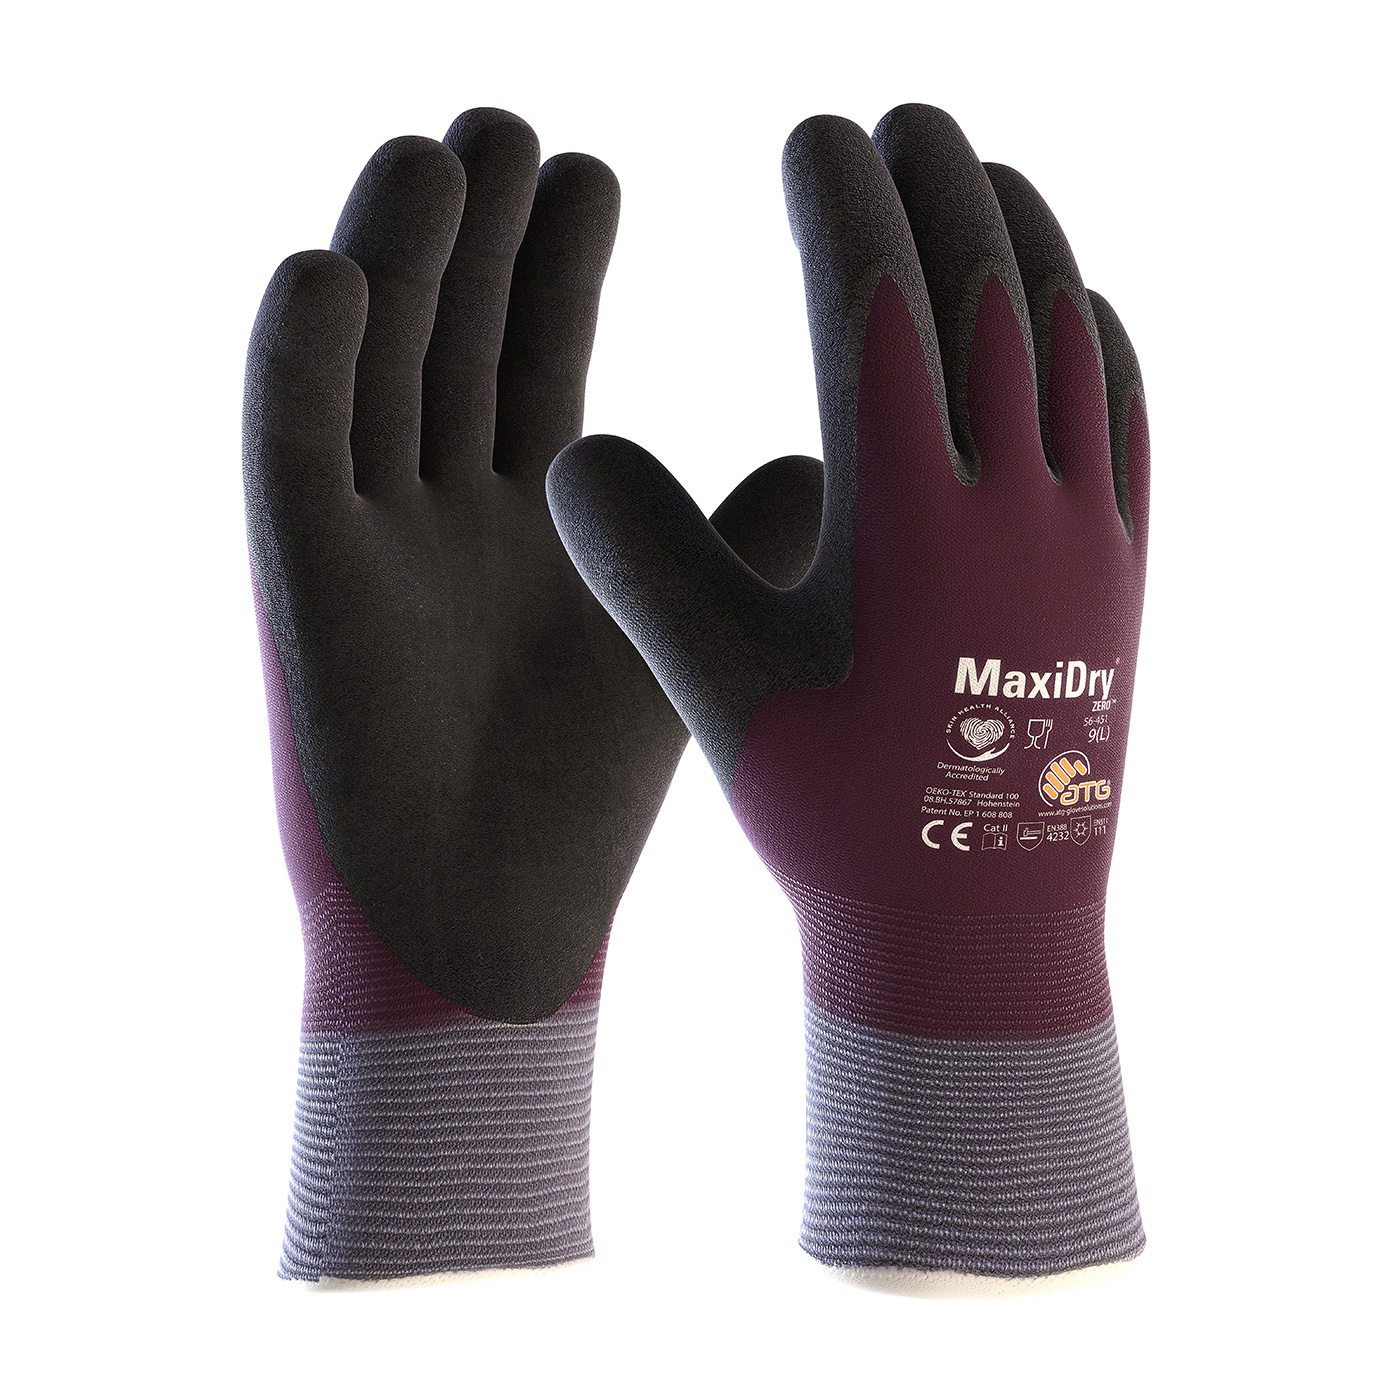 #56-451 PIP® MaxiDry® Zero™ Seamless Knit Nylon/Lycra Glove with Thermal Lining and Double-Dipped Nitrile Coated MicroFoam Grip on Full Hand 